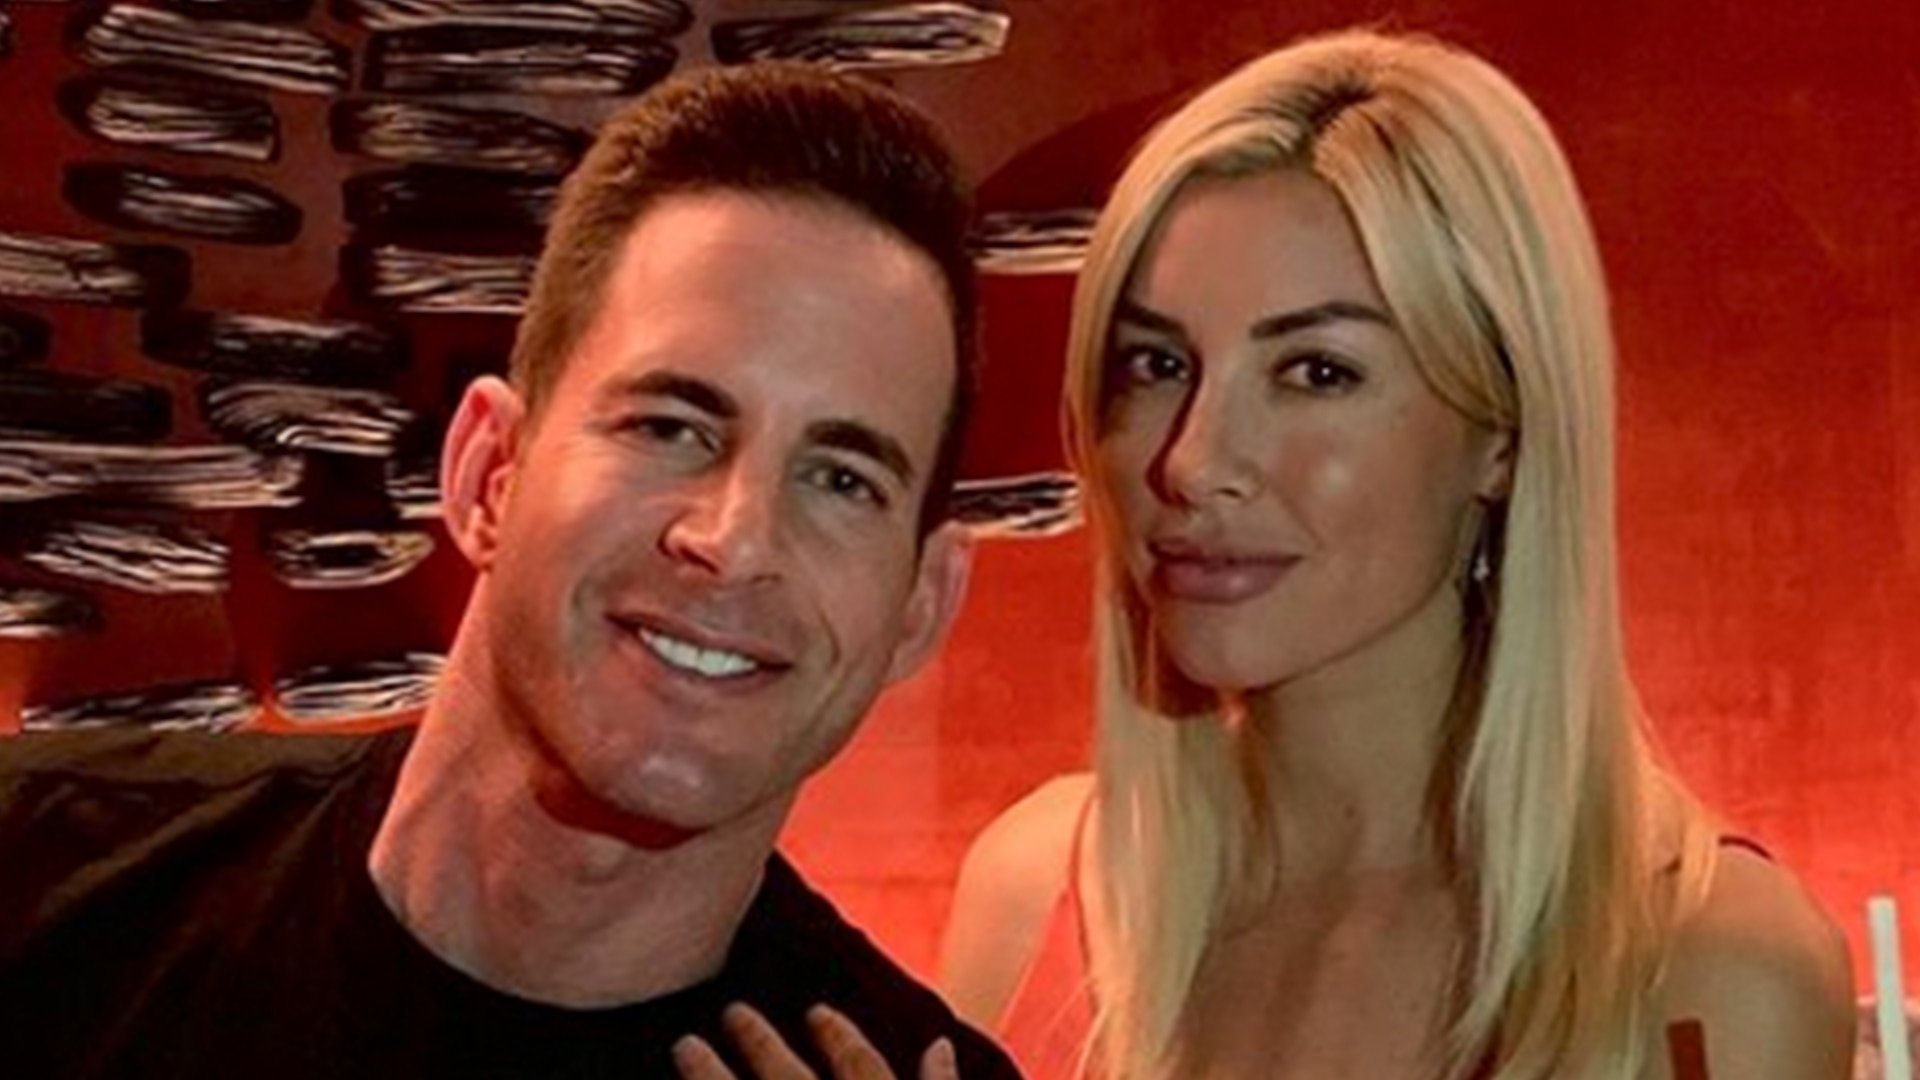 Tarek El Moussa Moves In With Girlfriend Heather Rae Young Its Real image